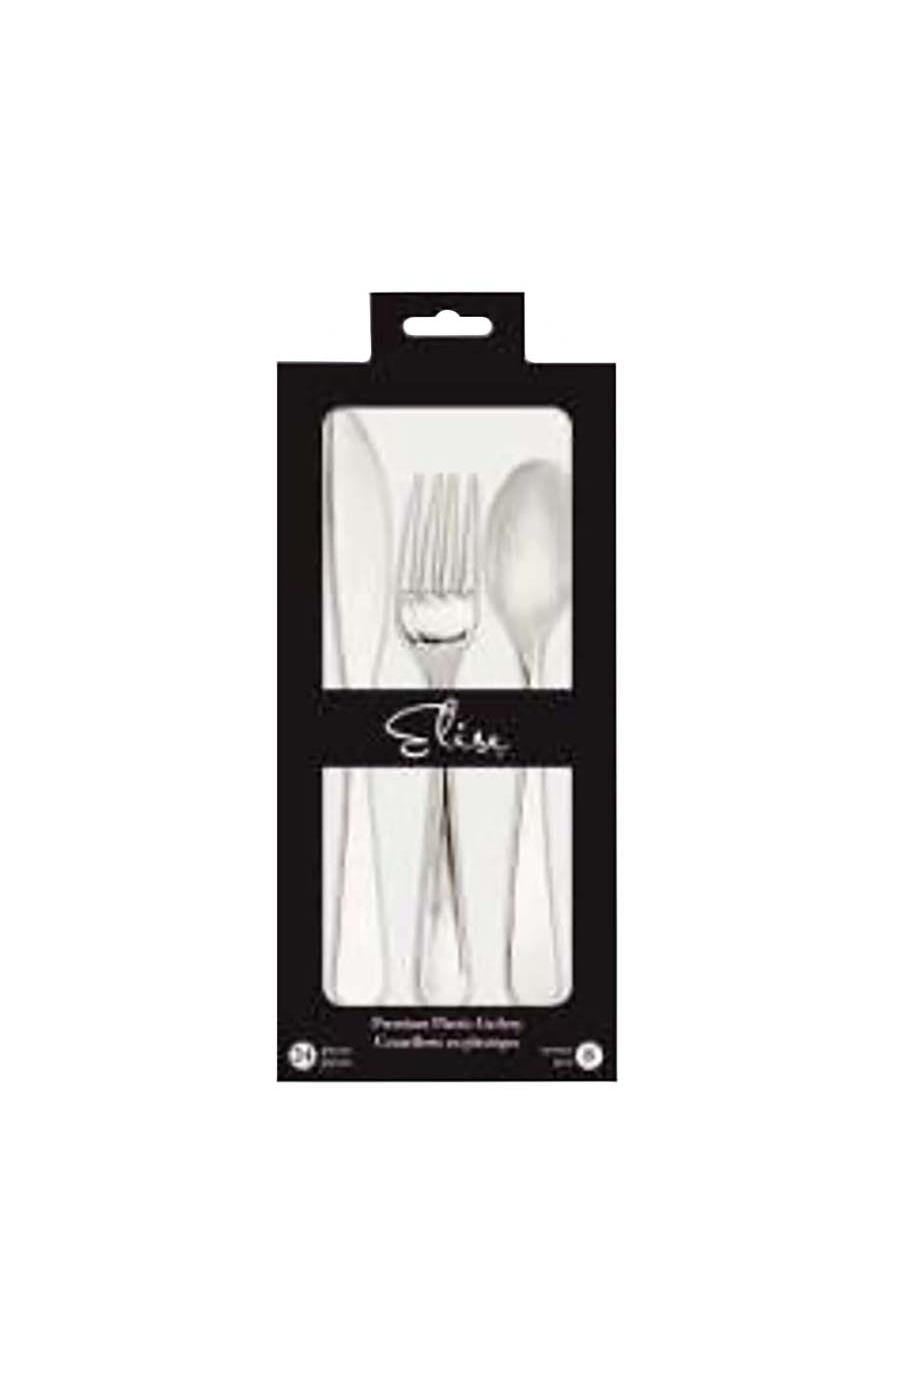 Creative Converting Plastic Knives, Forks & Spoons Combo Set - Metallic Silver; image 2 of 2